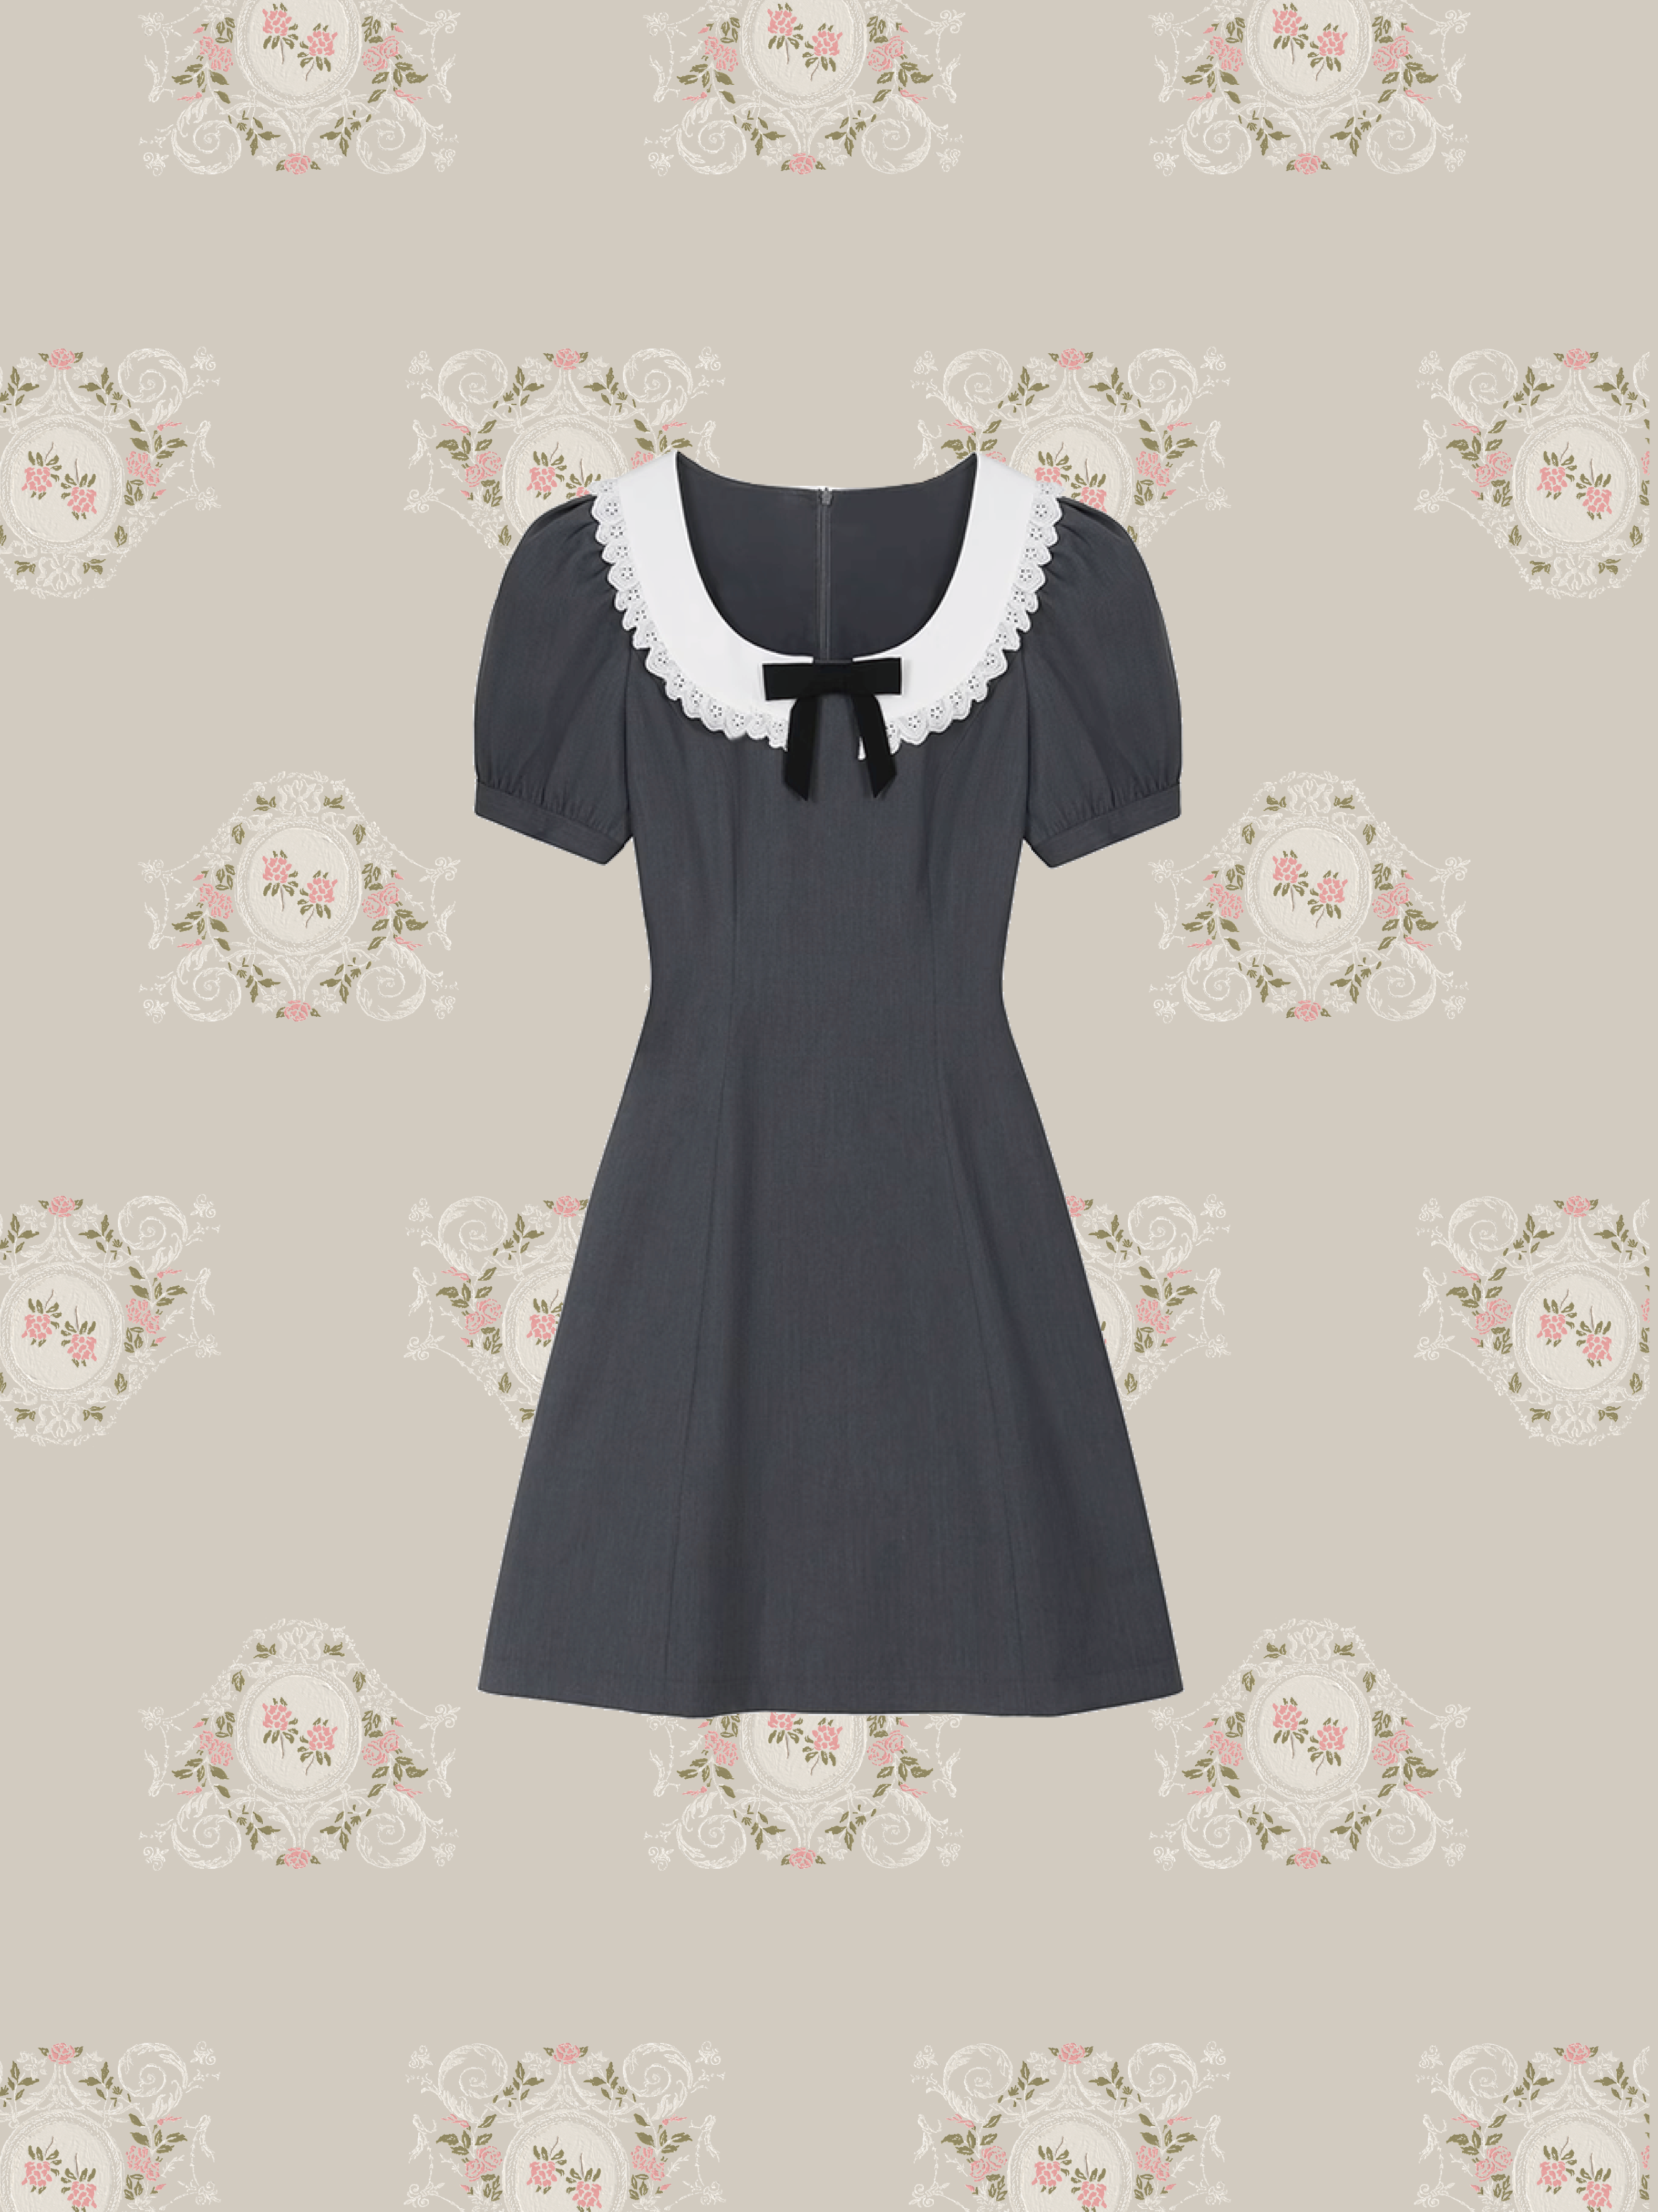 French Style Lace Collar Dress 